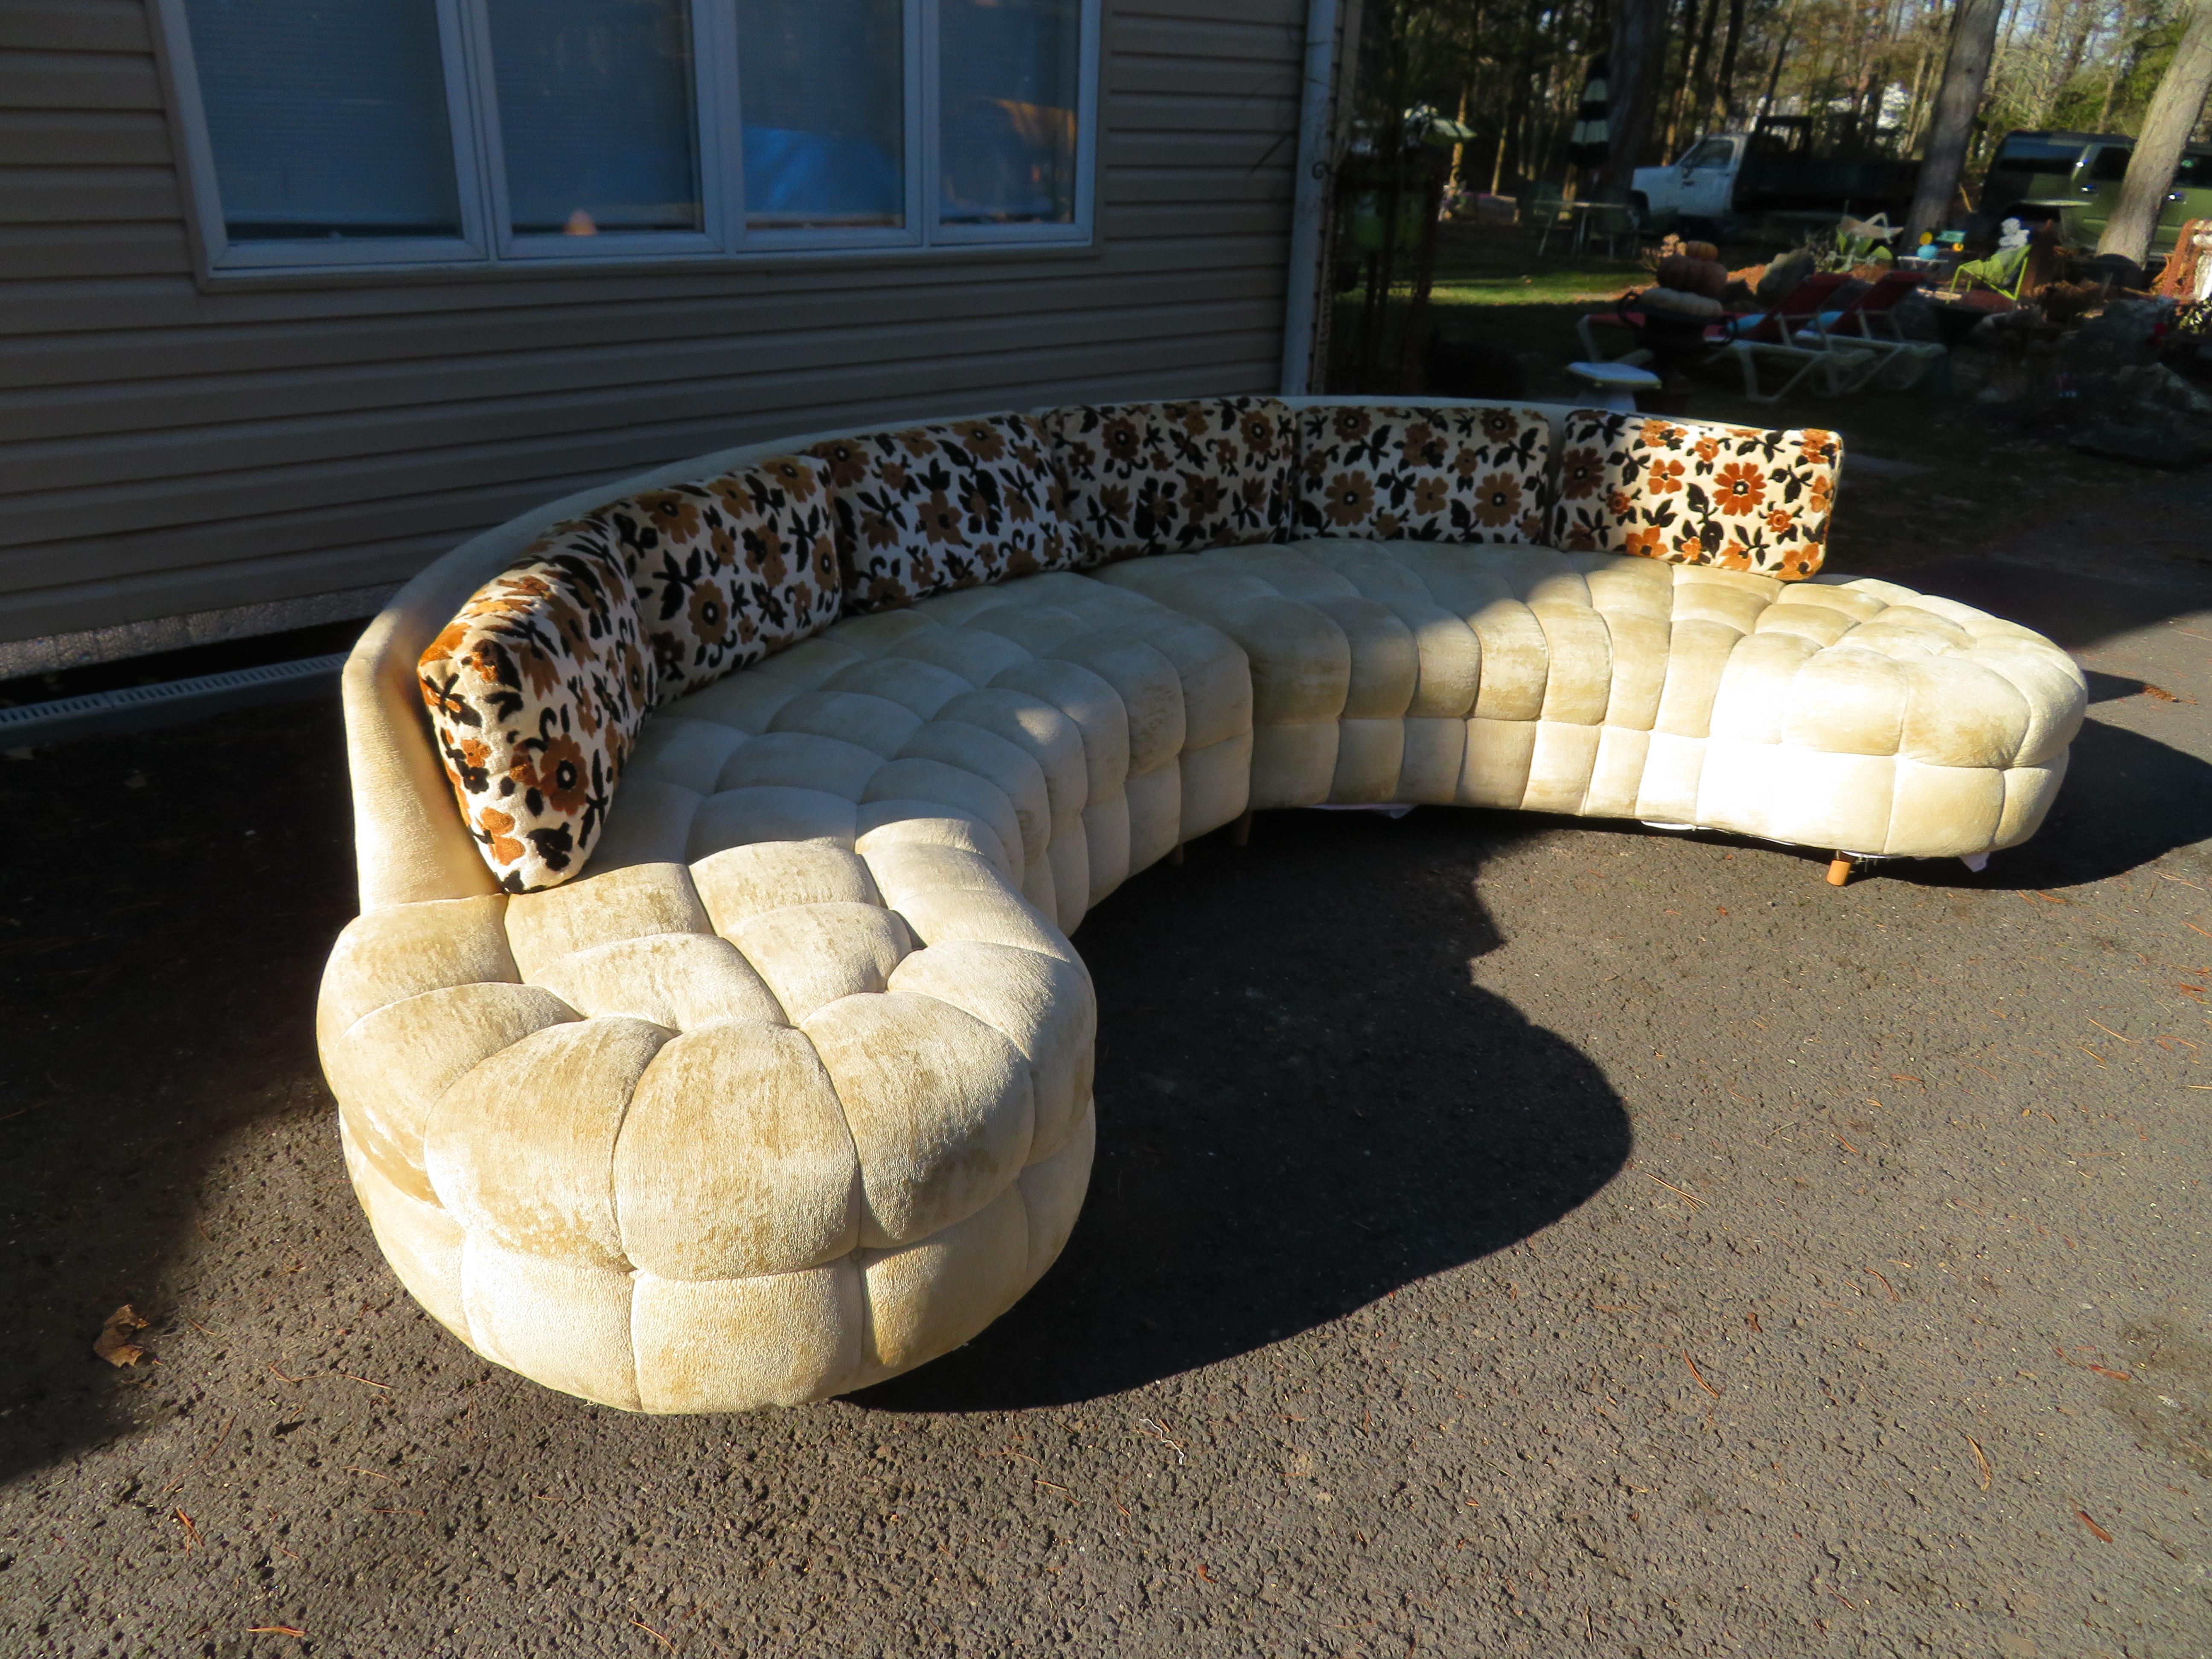 Upholstery Wonderful Curved Serpentine Two-Piece Adrian Pearsall Style Sectional Sofa